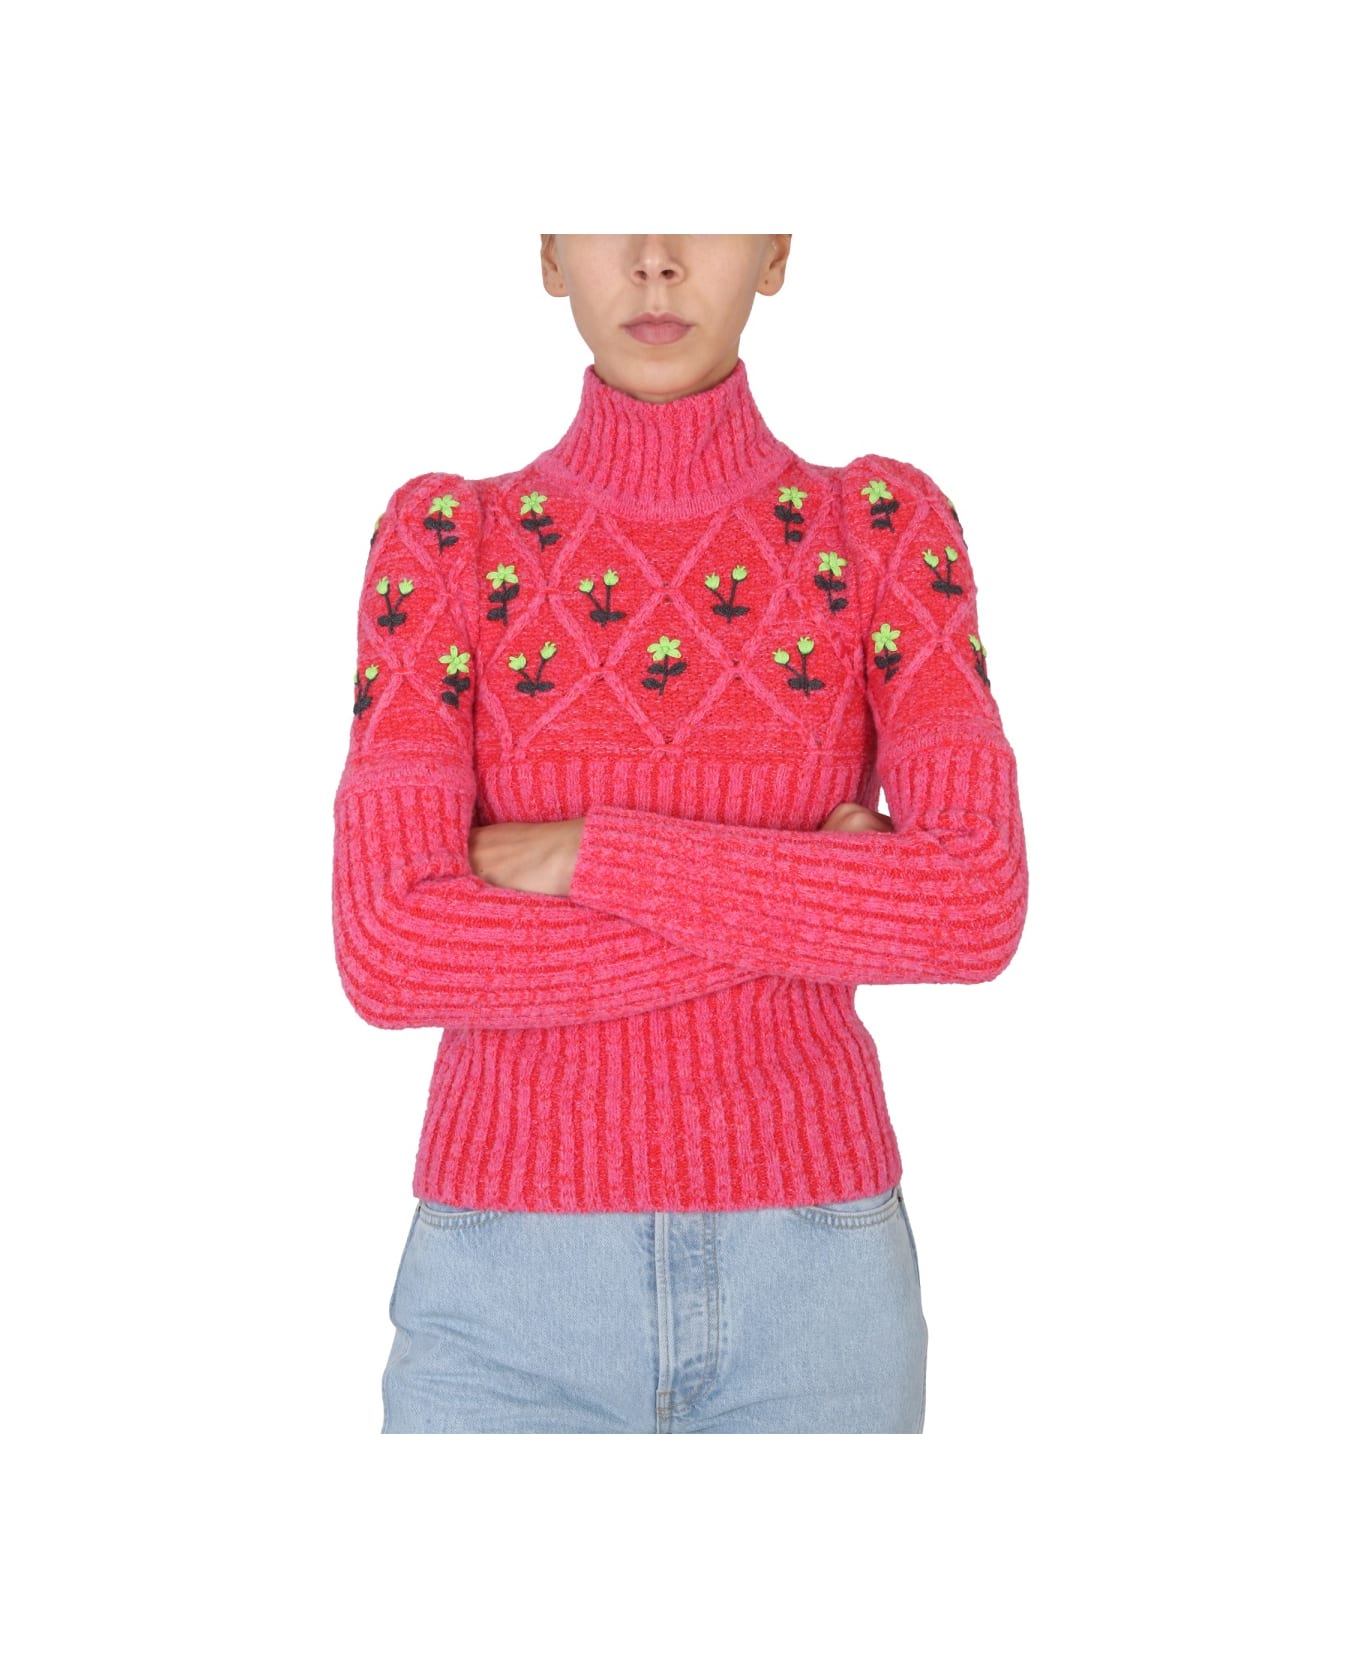 Cormio Jersey With Floral Embroidery - RED